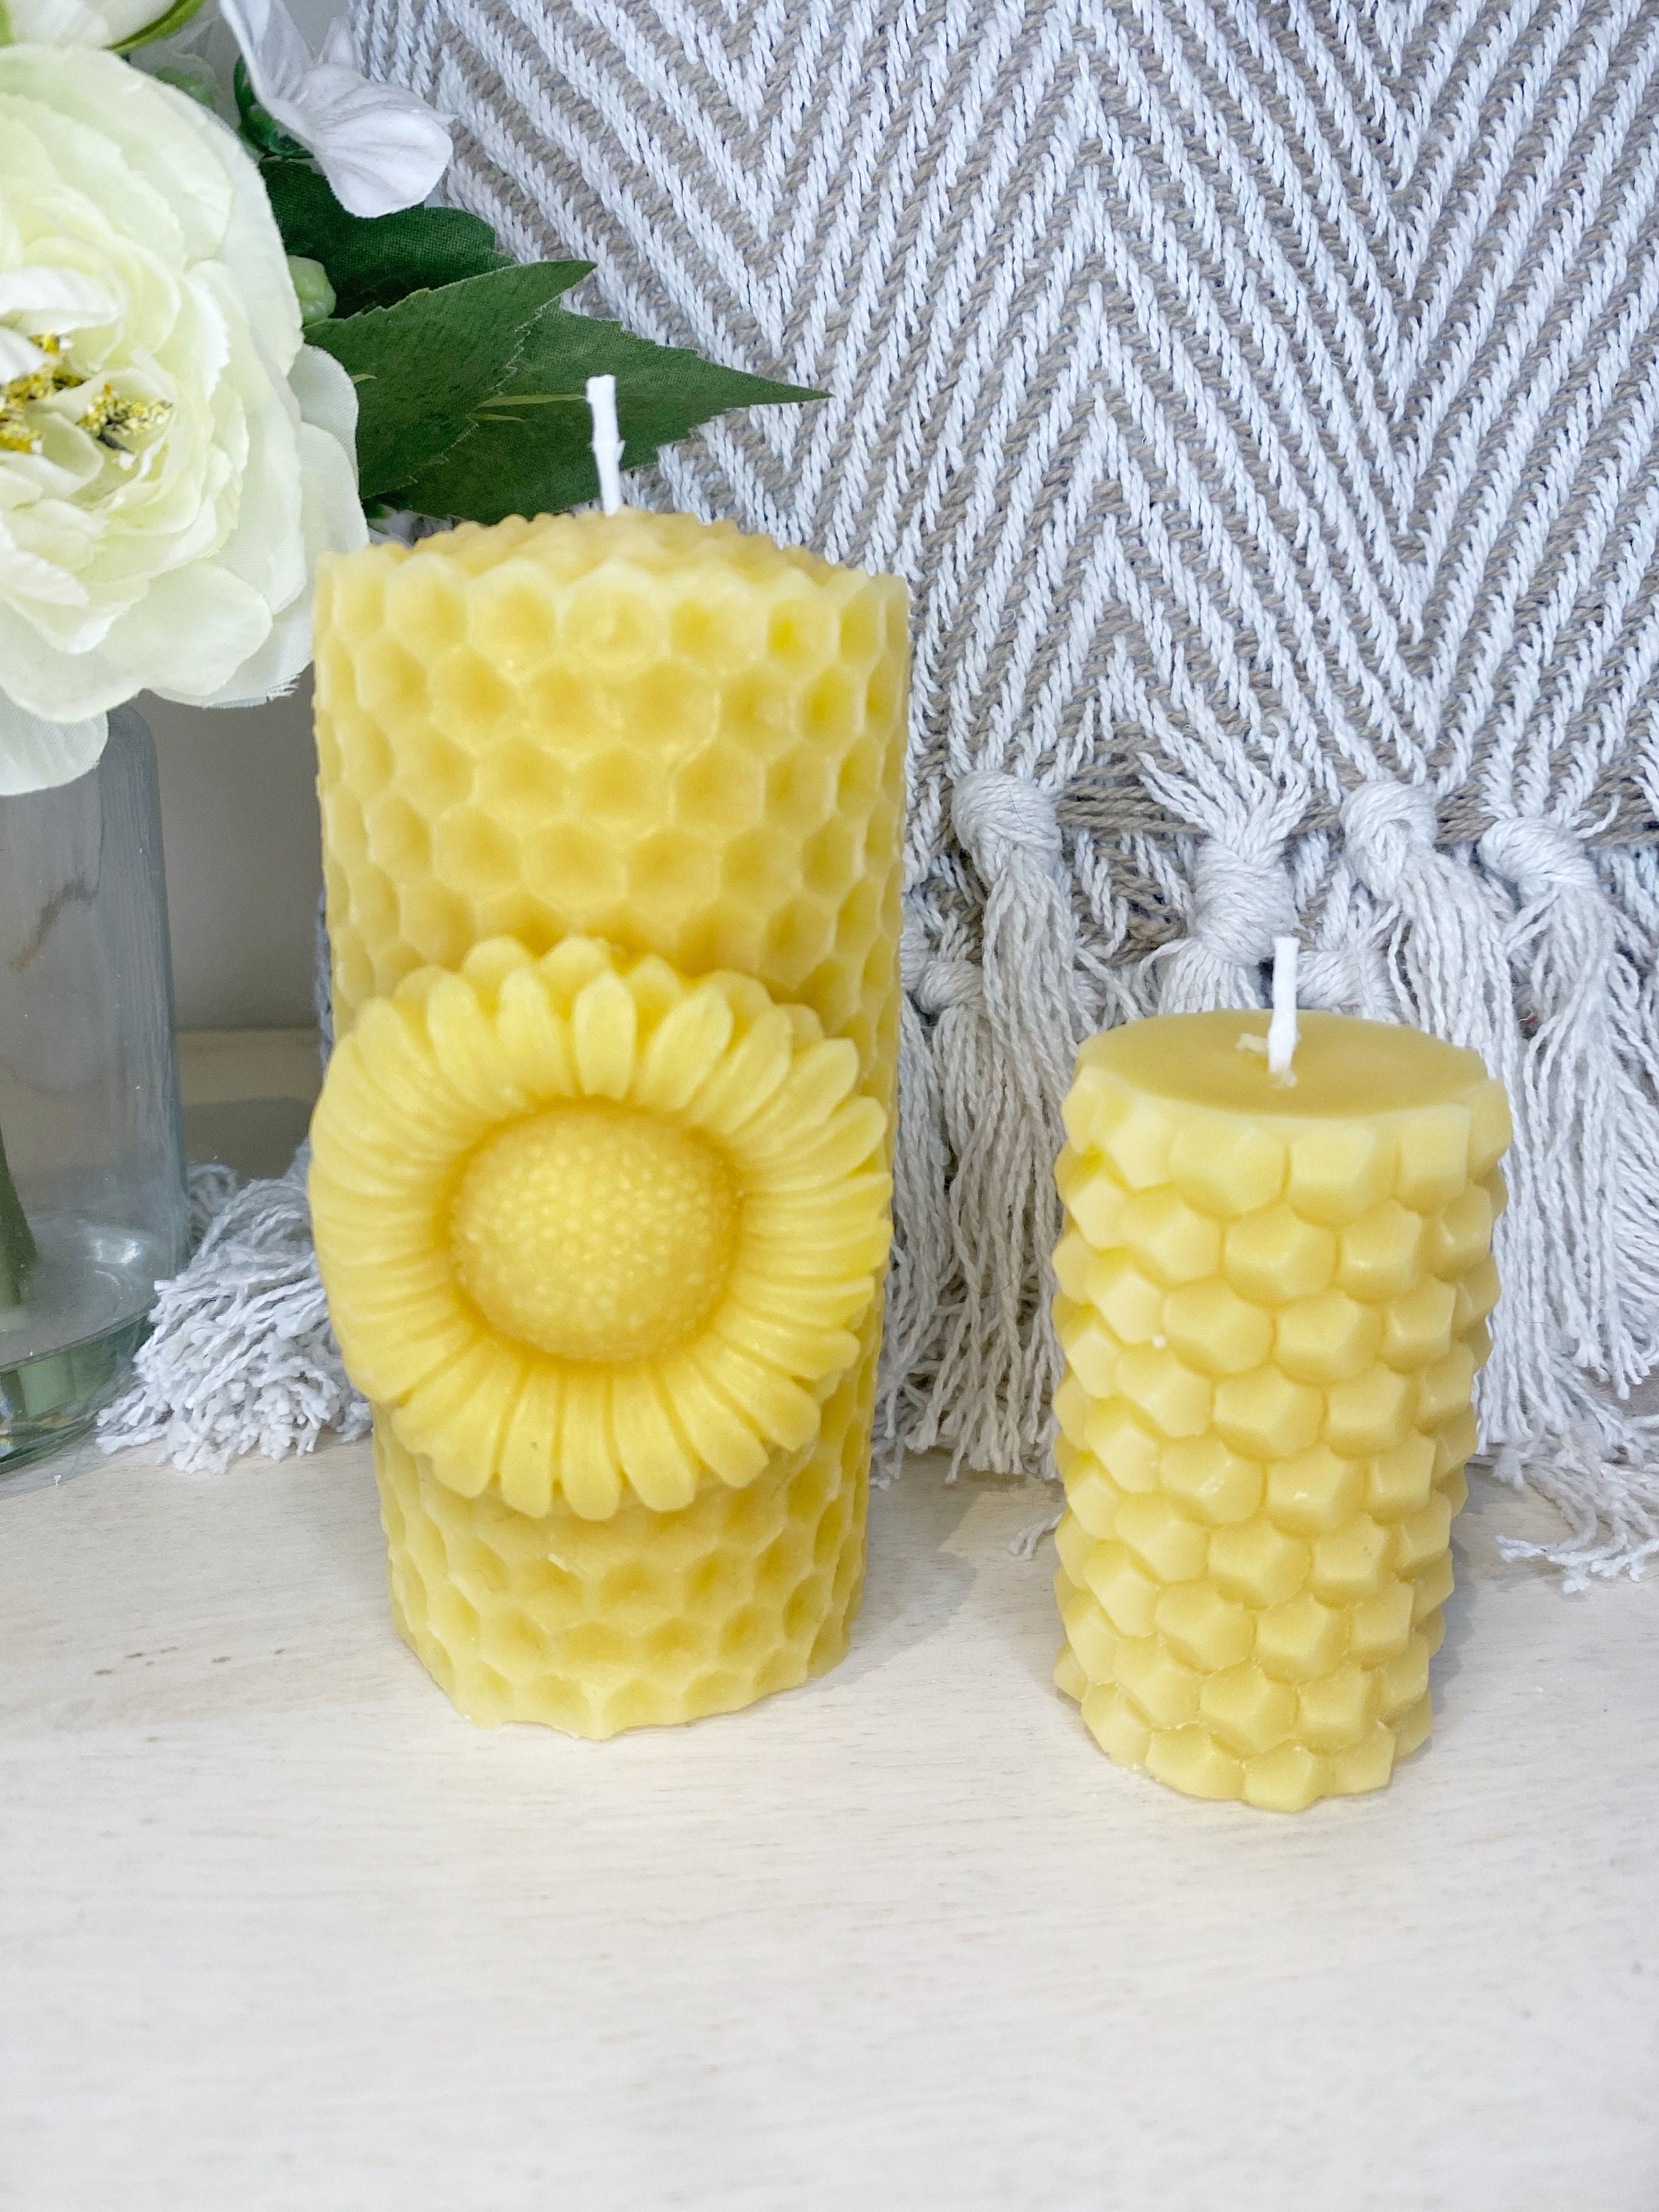 White Beeswax Pure Beeswax Yellow Beeswax Lace Candle Flower Paper Bow  Aromatherapy Mould Convenient and Durable Candle Making